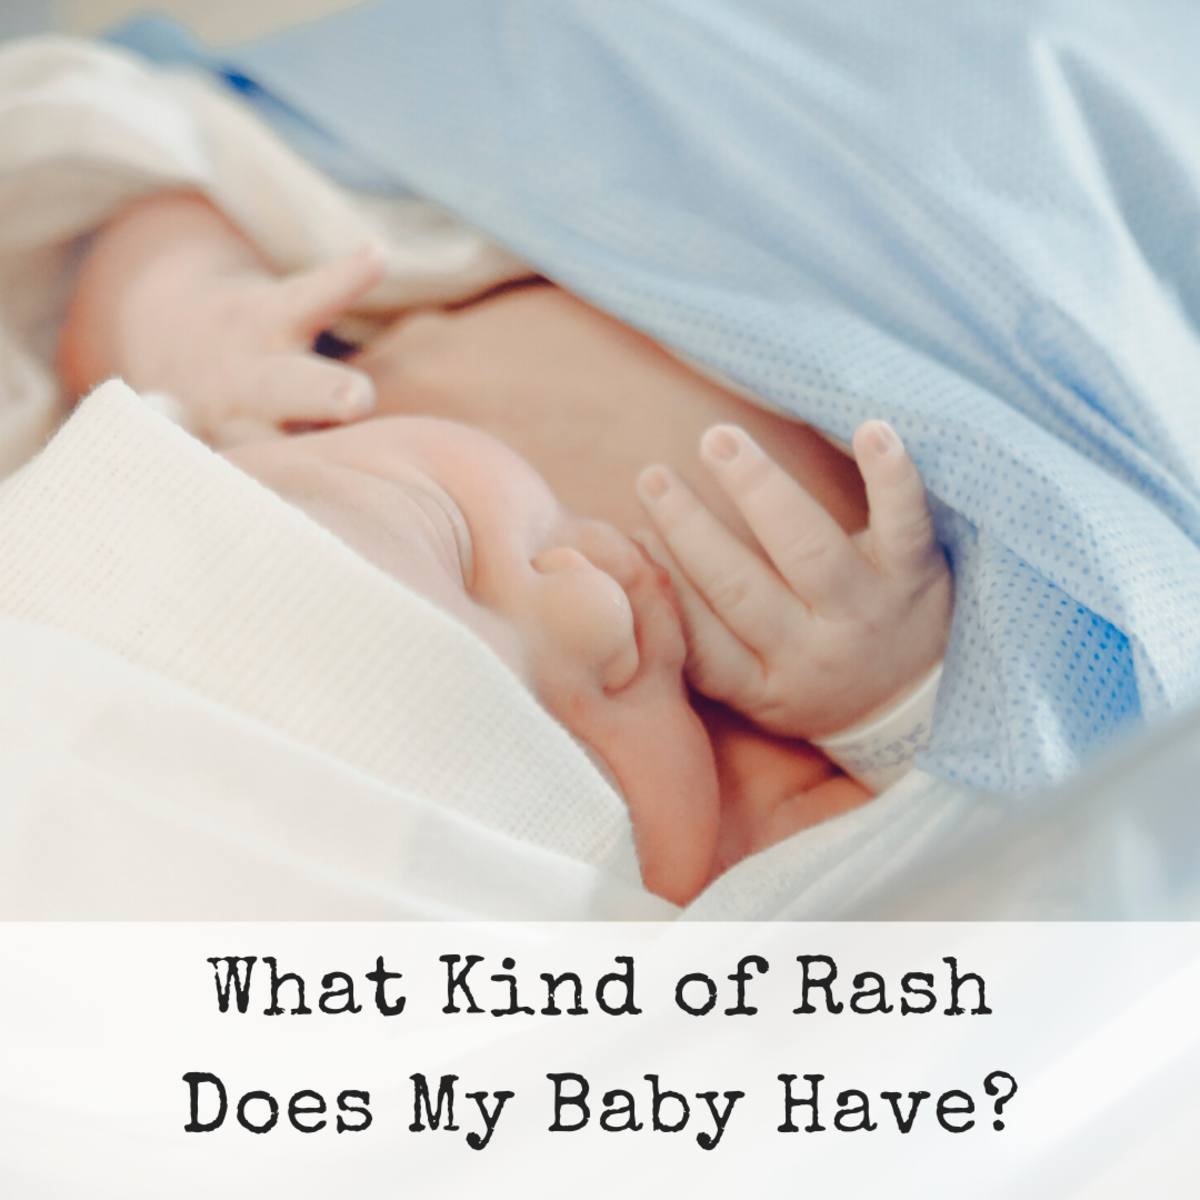 Is It a Rash or Baby Acne?